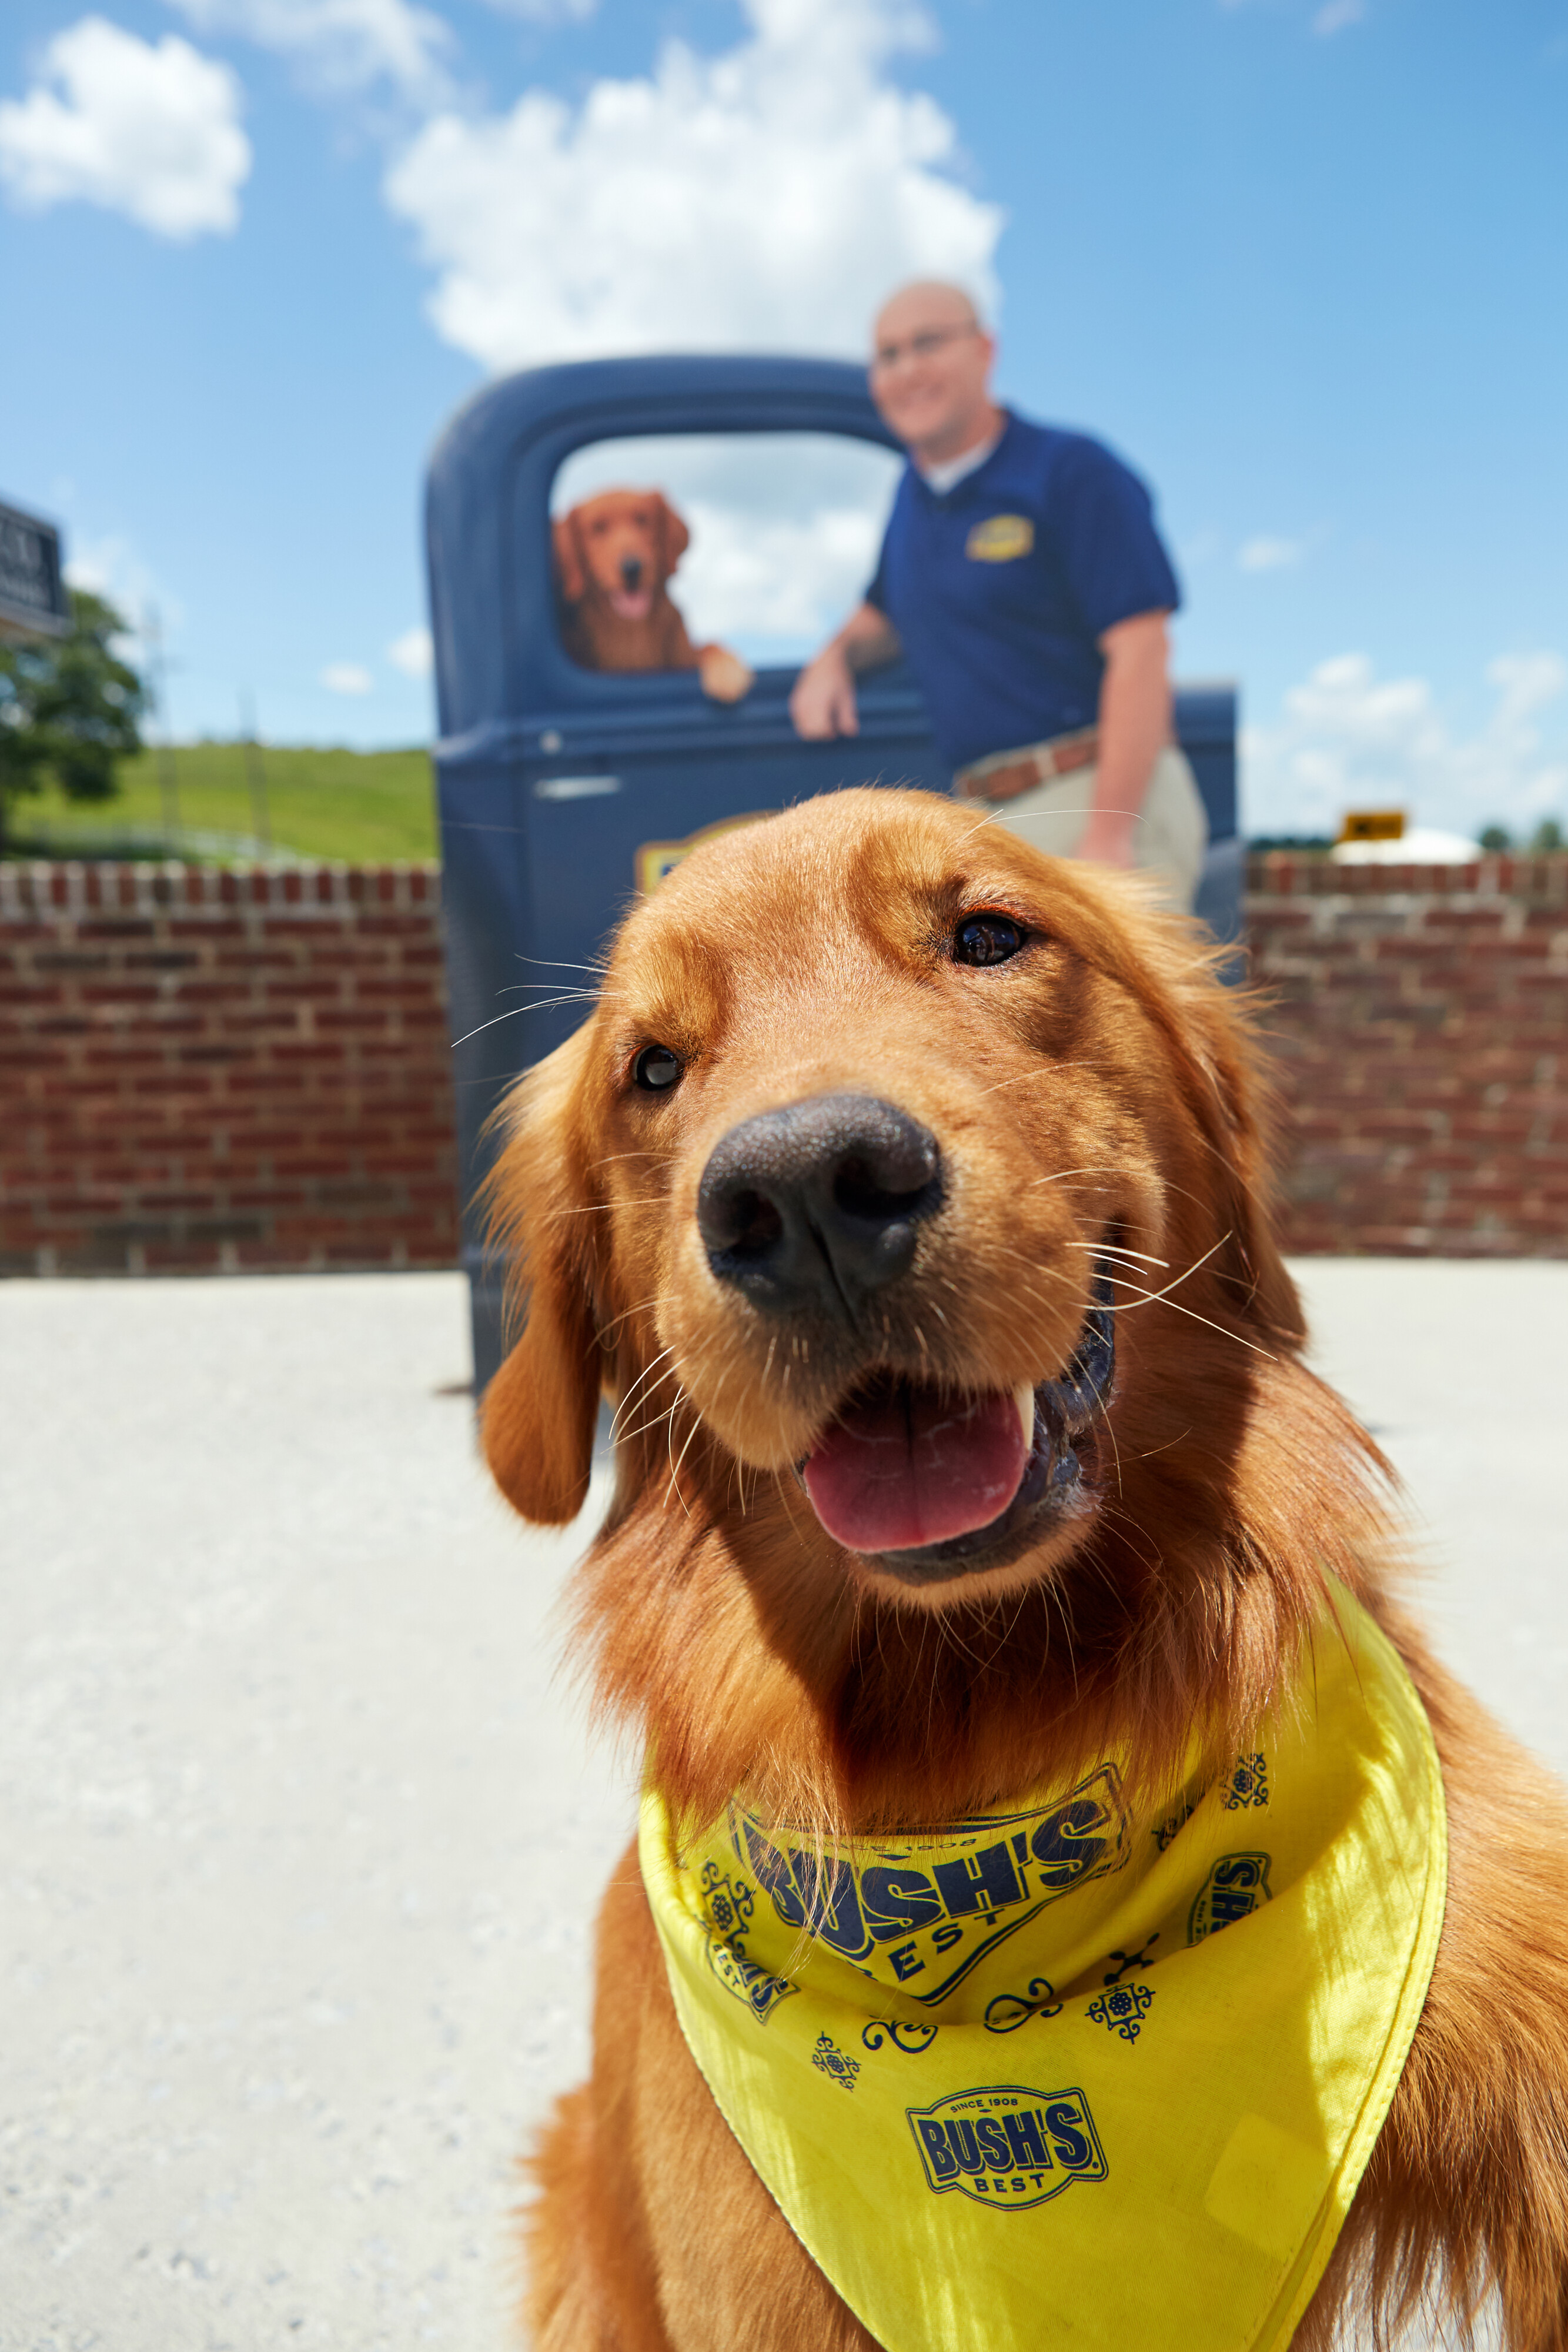 A golden retriever wearing a bandana smiling in front of a man and a vintage pickup truck